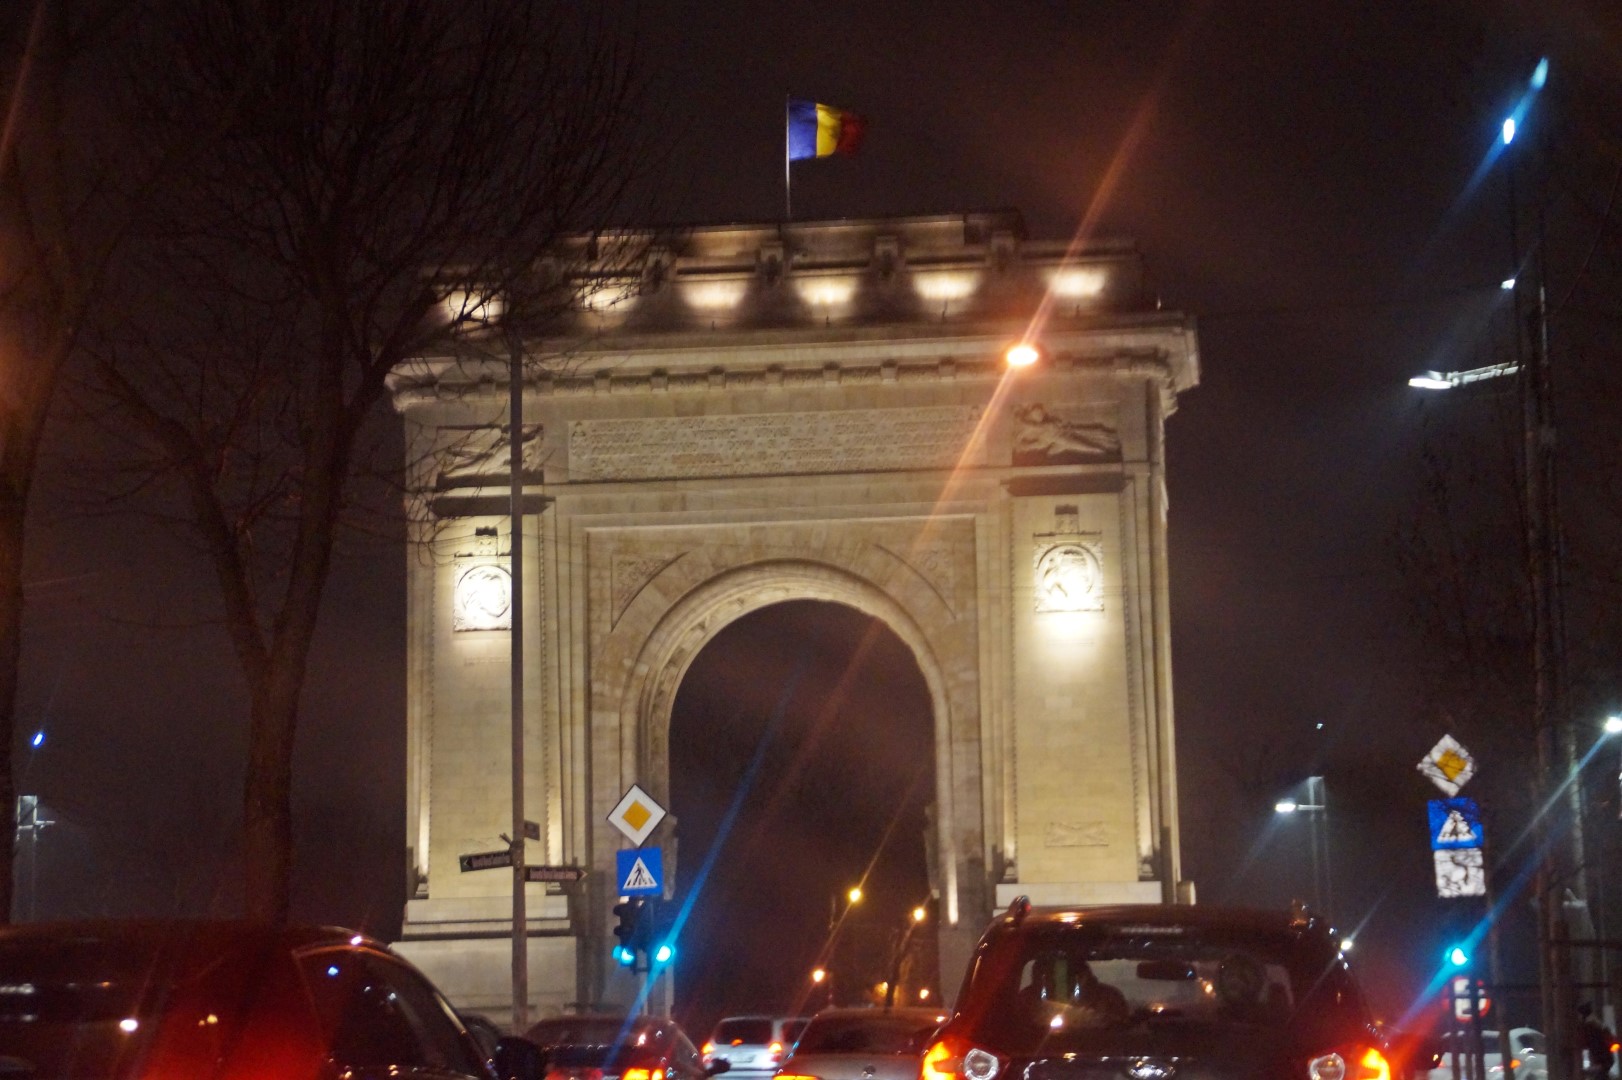 Arcul de Triumf - seen from the taxi as we drove to the hotel from the airport